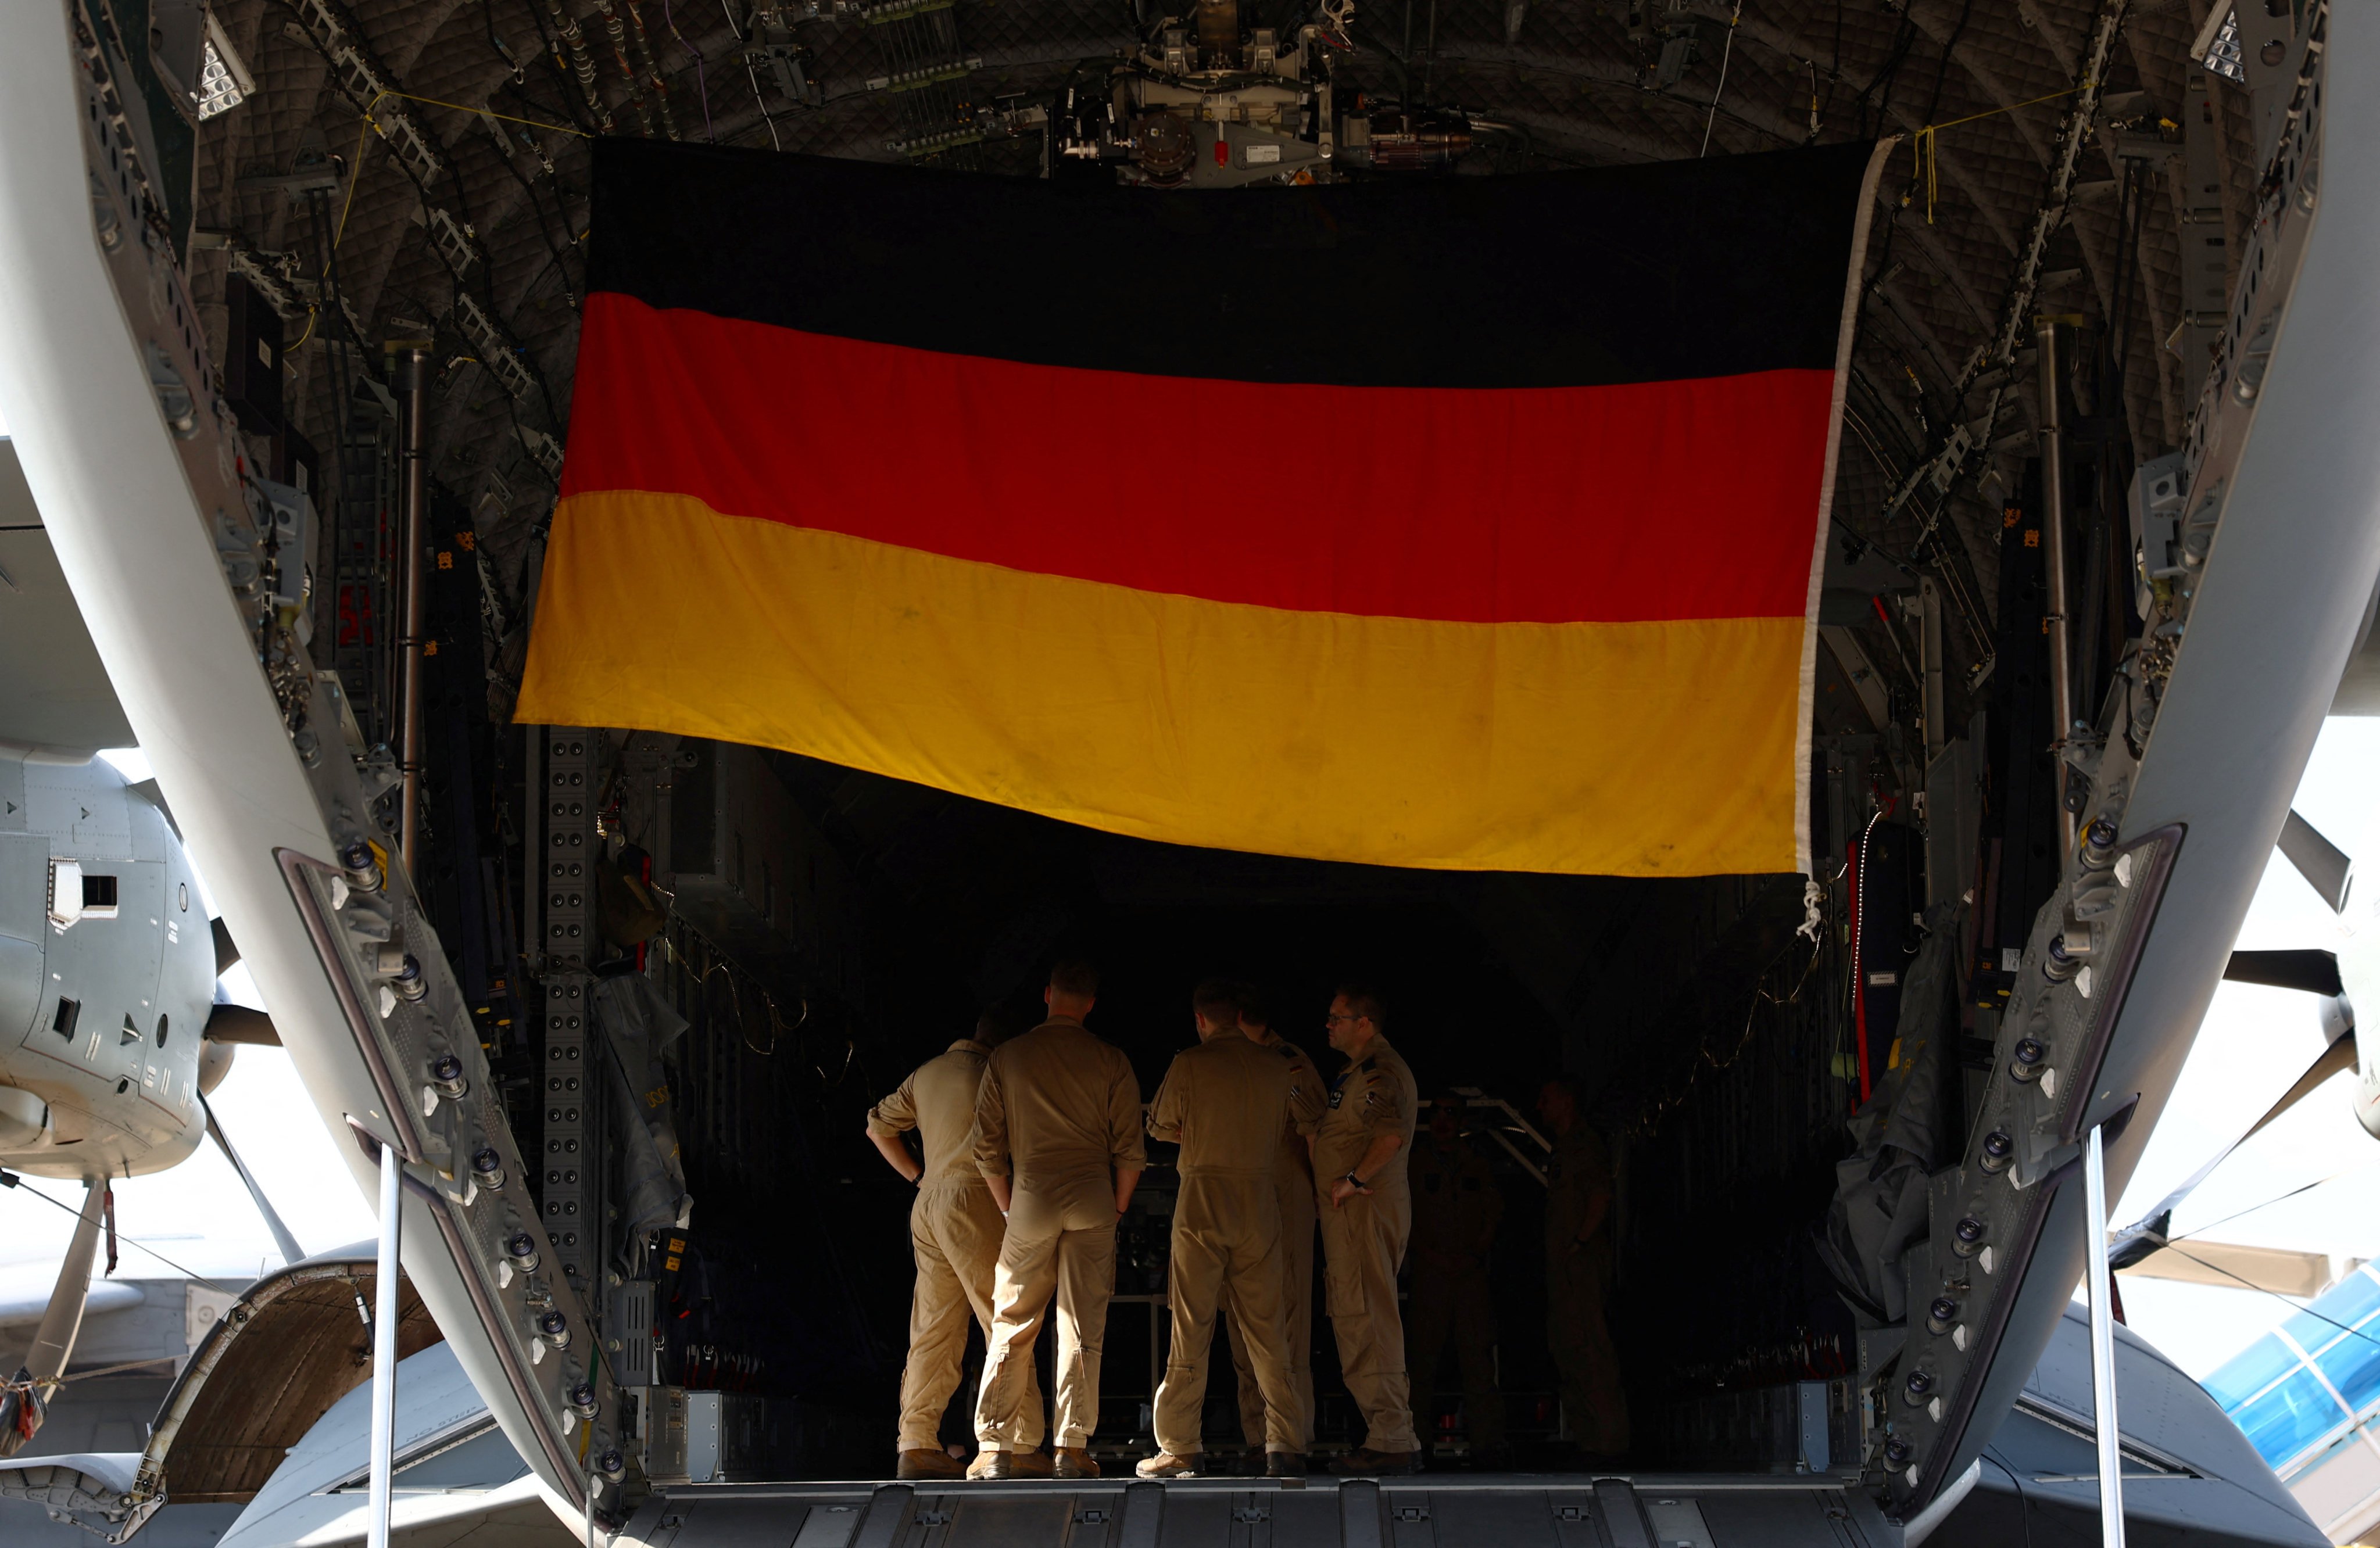 A German national flag is displayed inside an Airbus A400M of the German Air Force at the Singapore Airshow on February 20. One of the German officials on the call was reportedly a general who stayed at a Singapore hotel during the event. Photo: Reuters